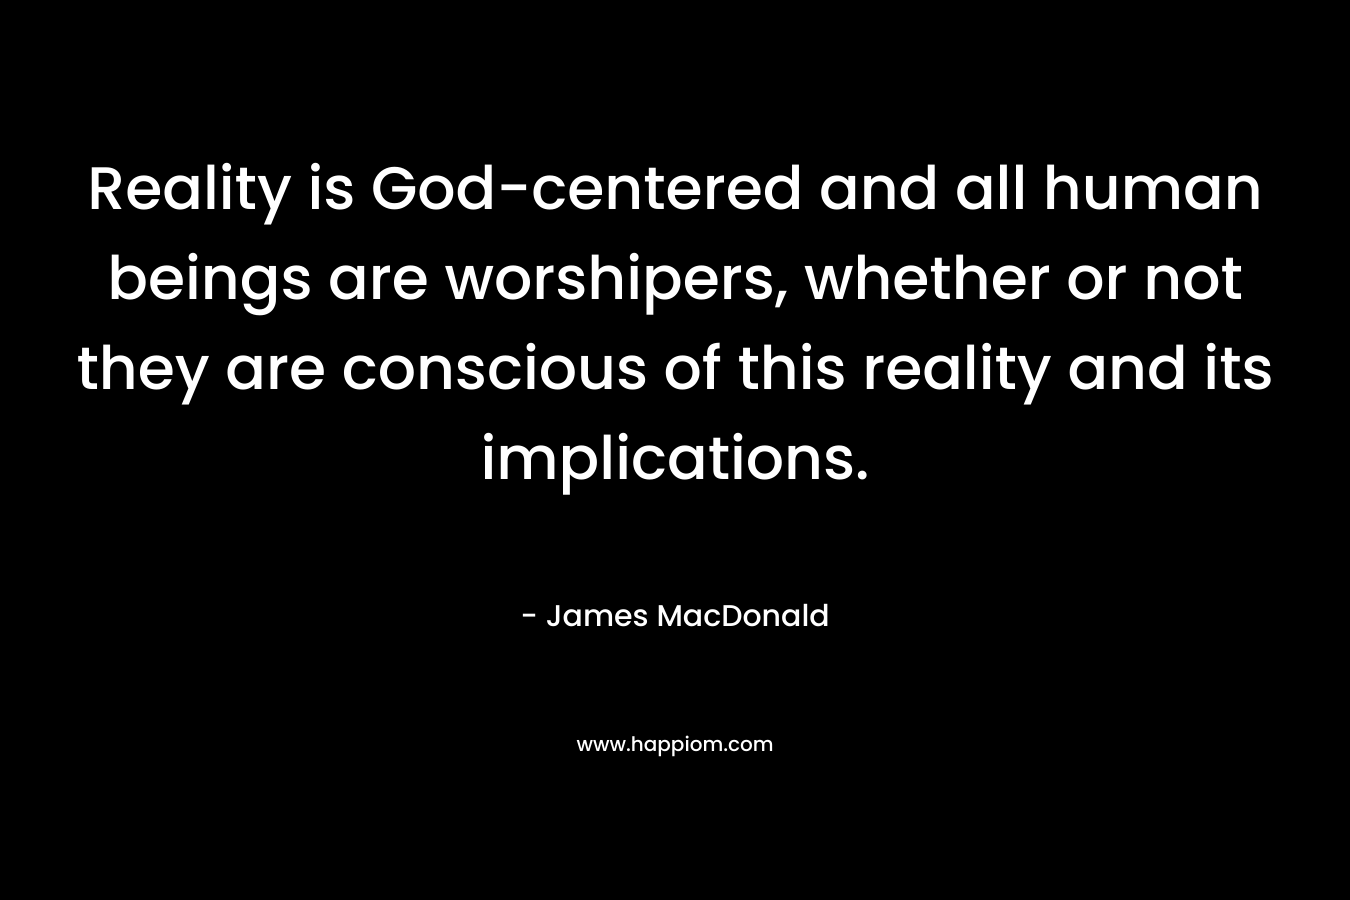 Reality is God-centered and all human beings are worshipers, whether or not they are conscious of this reality and its implications. – James MacDonald